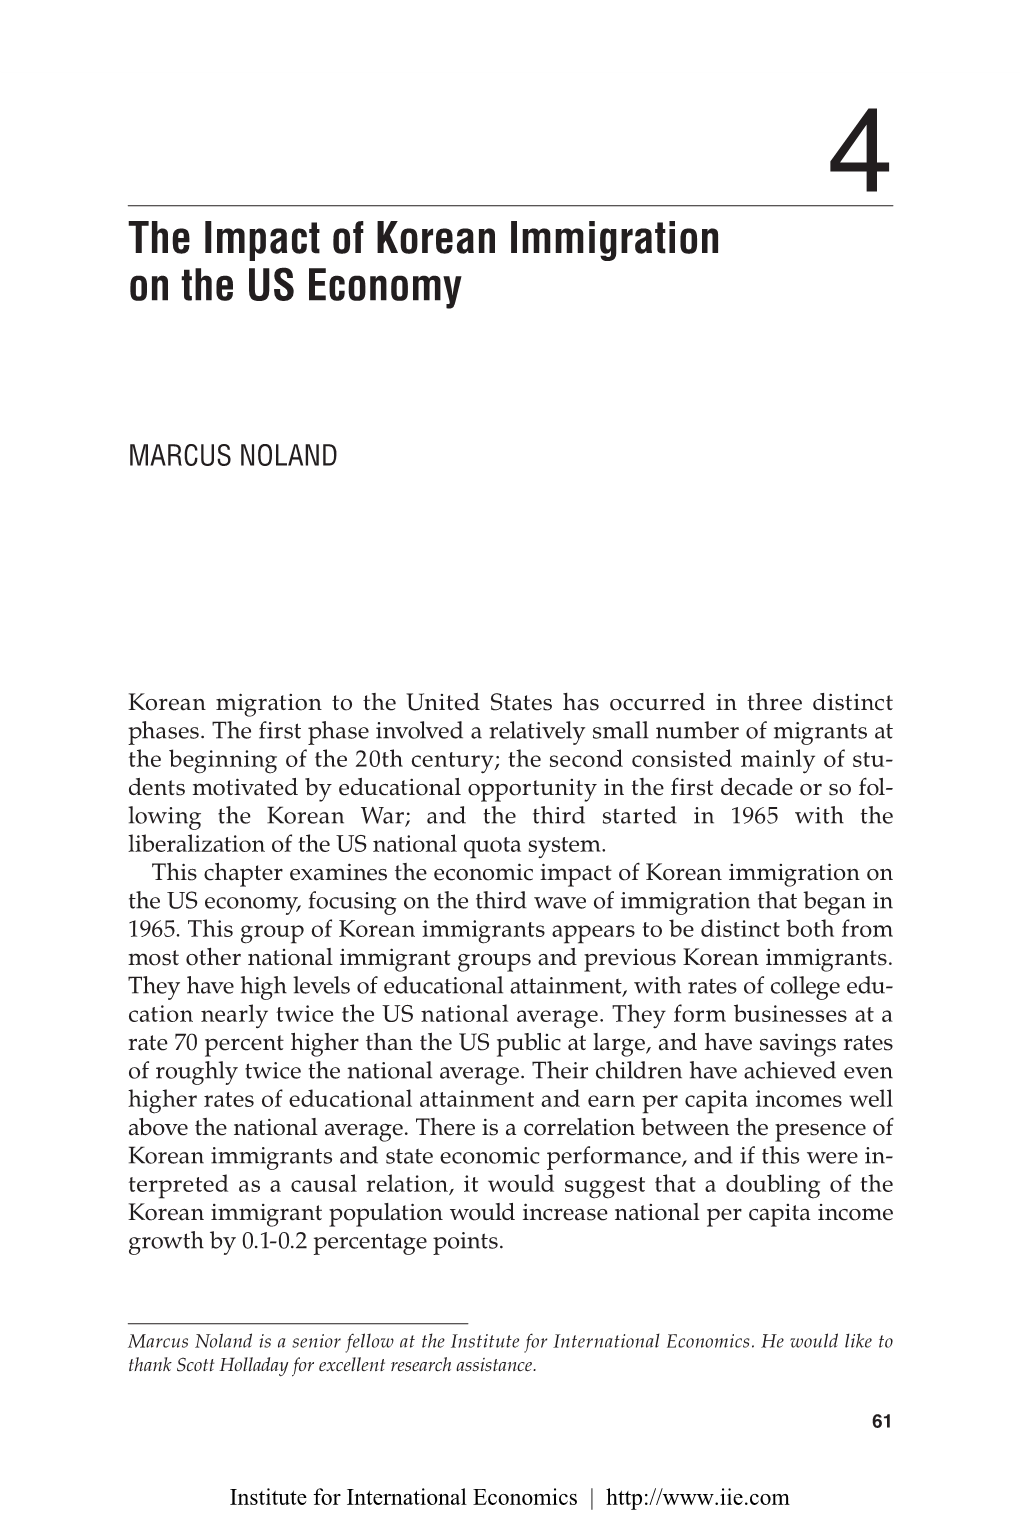 Chapter 4: the Impact of Korean Immigration on the US Economy